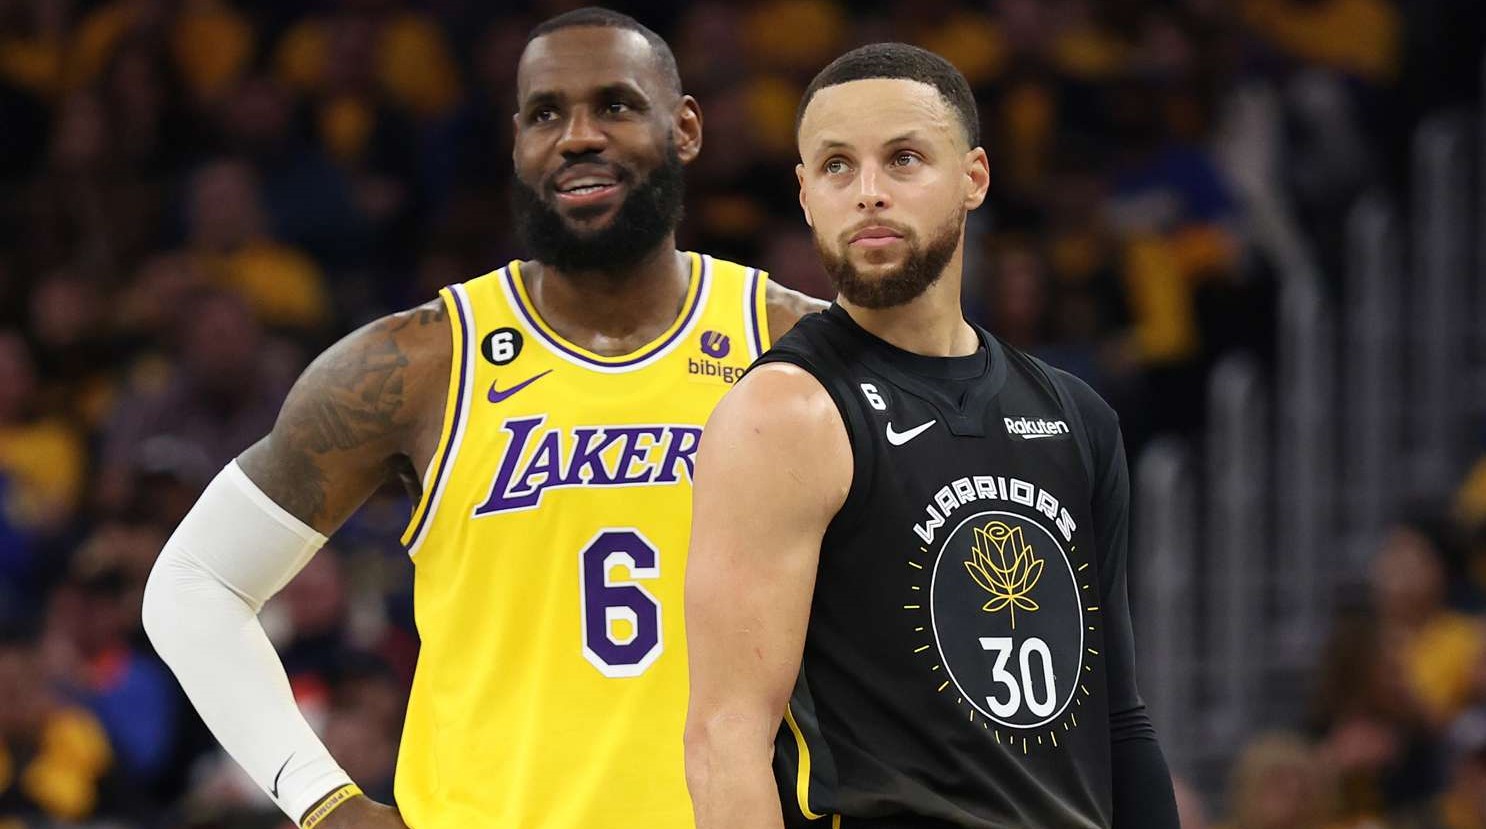 LeBron Jamems and Stephen Curry 2024 Olympics